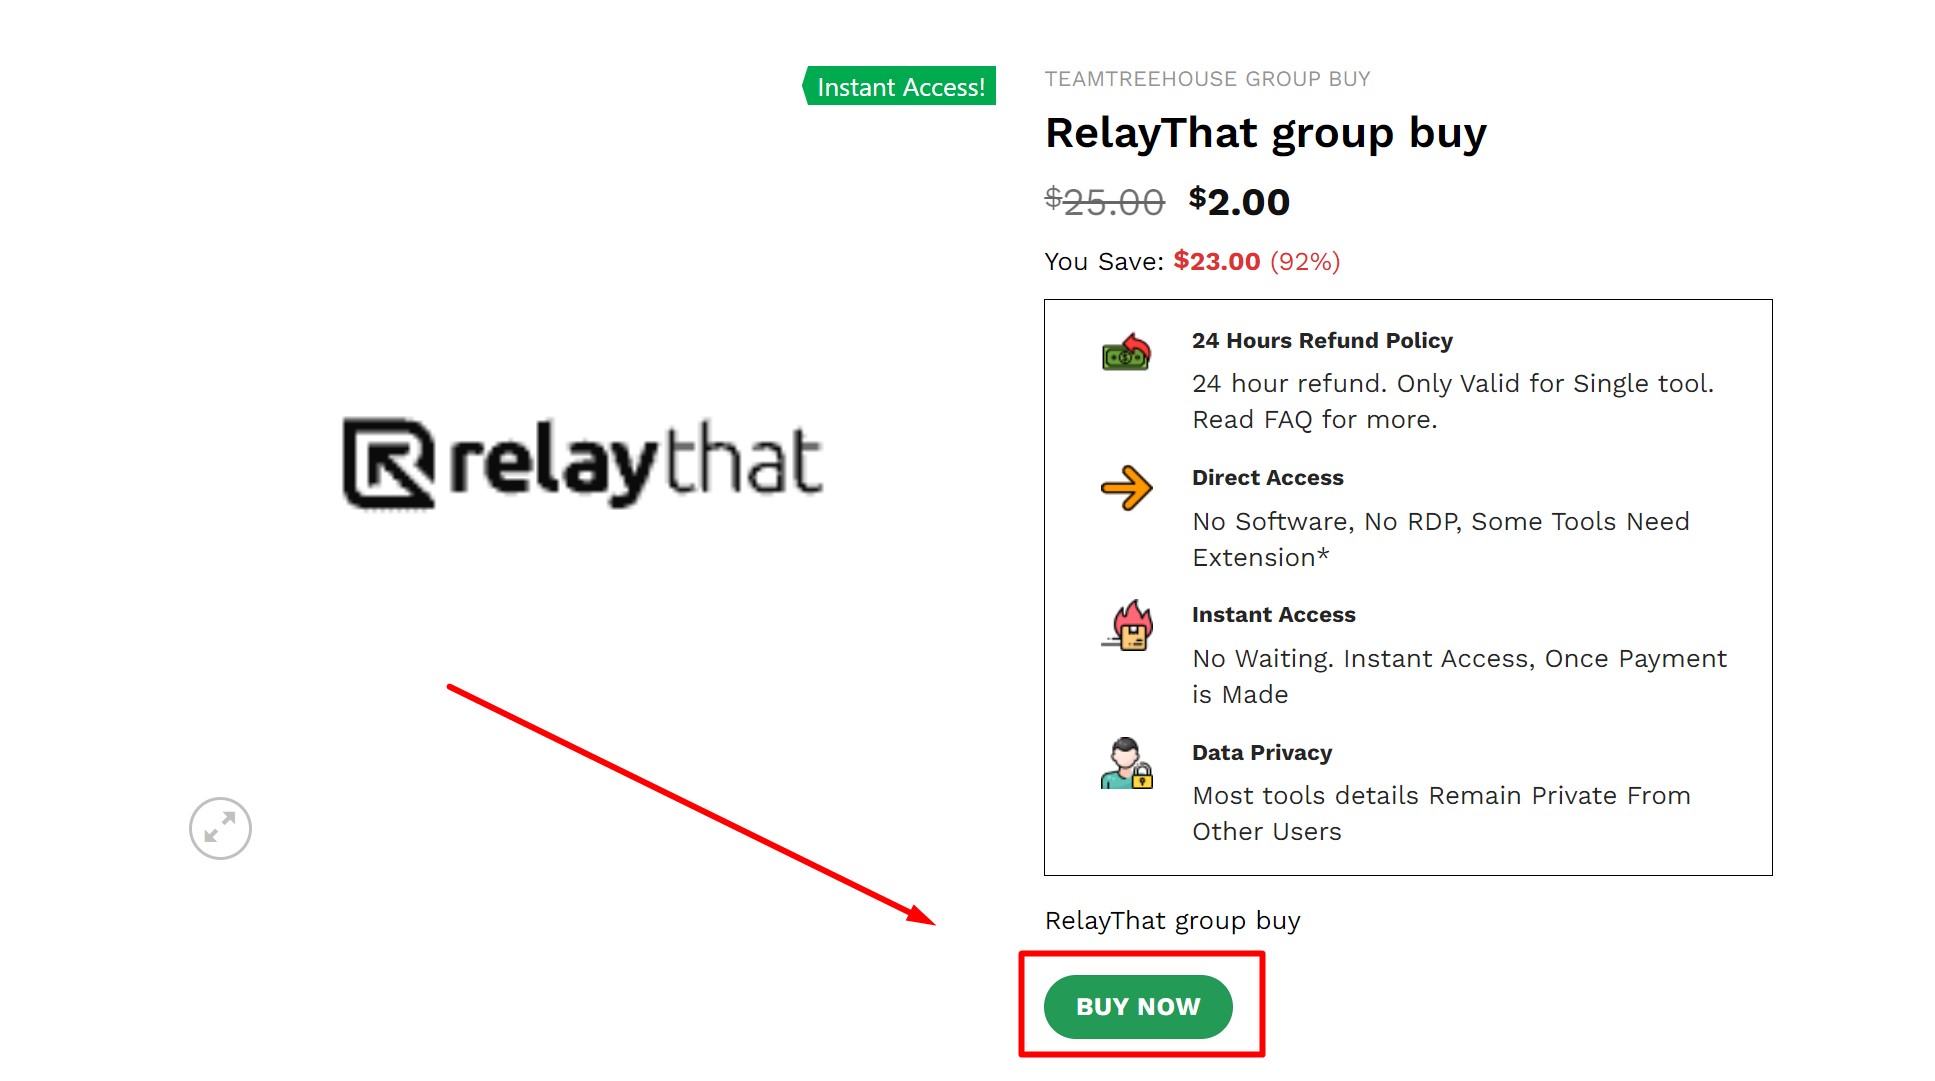 relaythat group buy